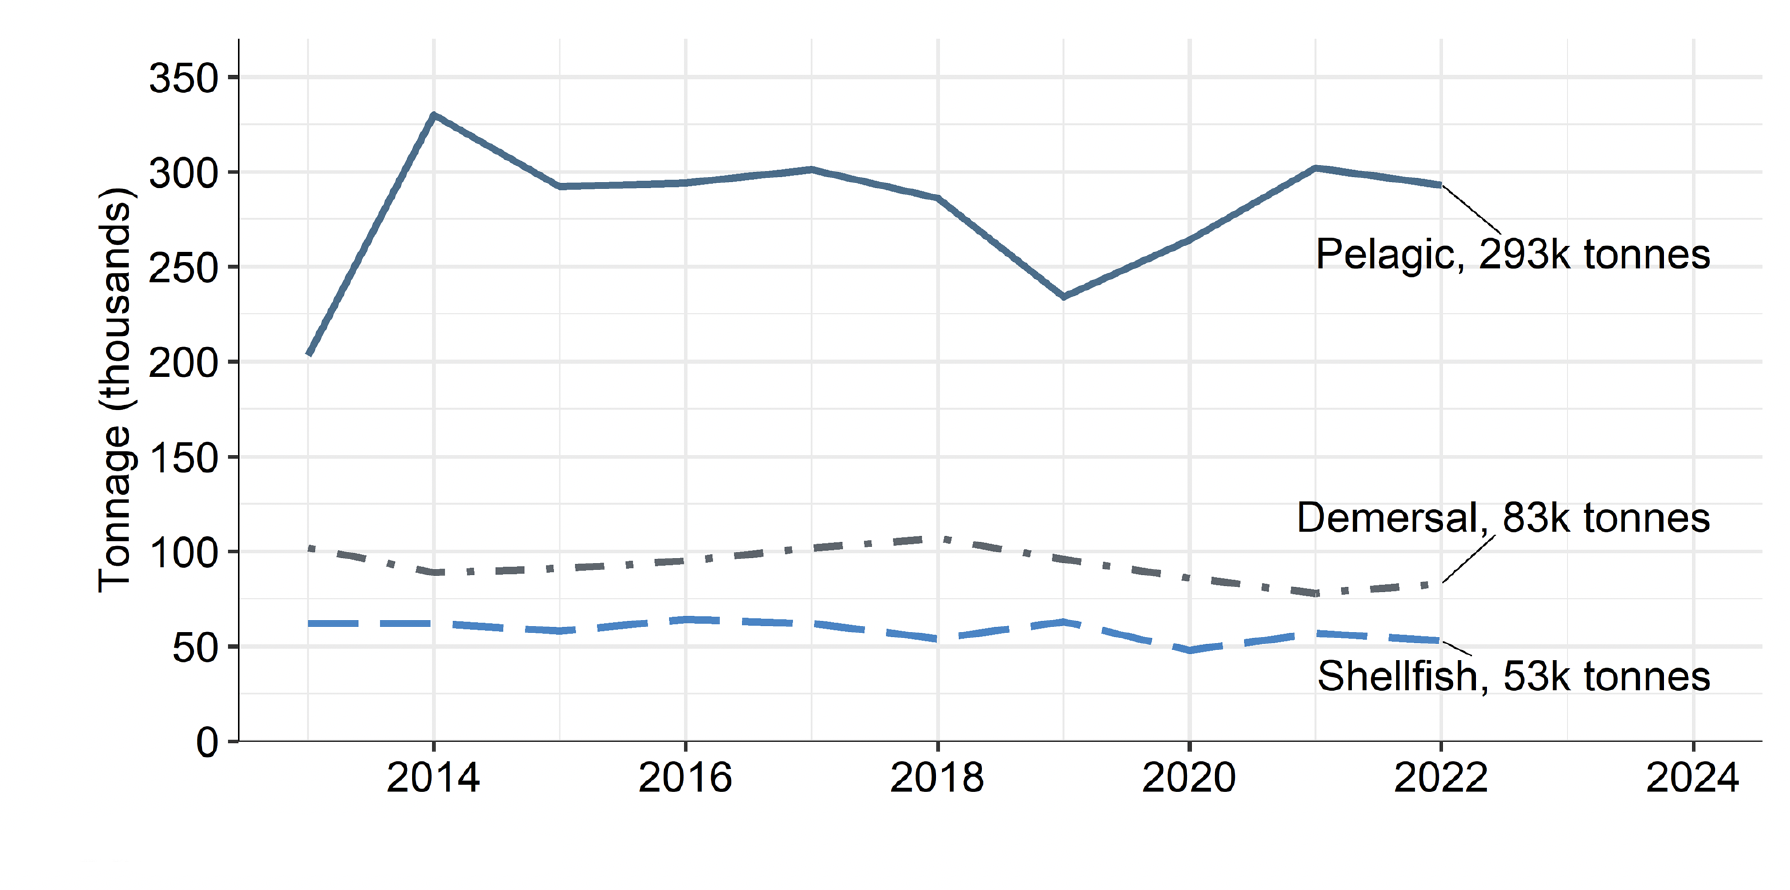 A graph showing the tonnage of landings by Scottish vessels by species type from 2013 to 2022. The graph shows that pelagic landings increased sharply from 203 tonnes in 2013 to 330 tonnes in 2014 before gradually decreasing to 234 tonnes in 2019. Pelagic landings then increased to 293 tonnes in 2022.